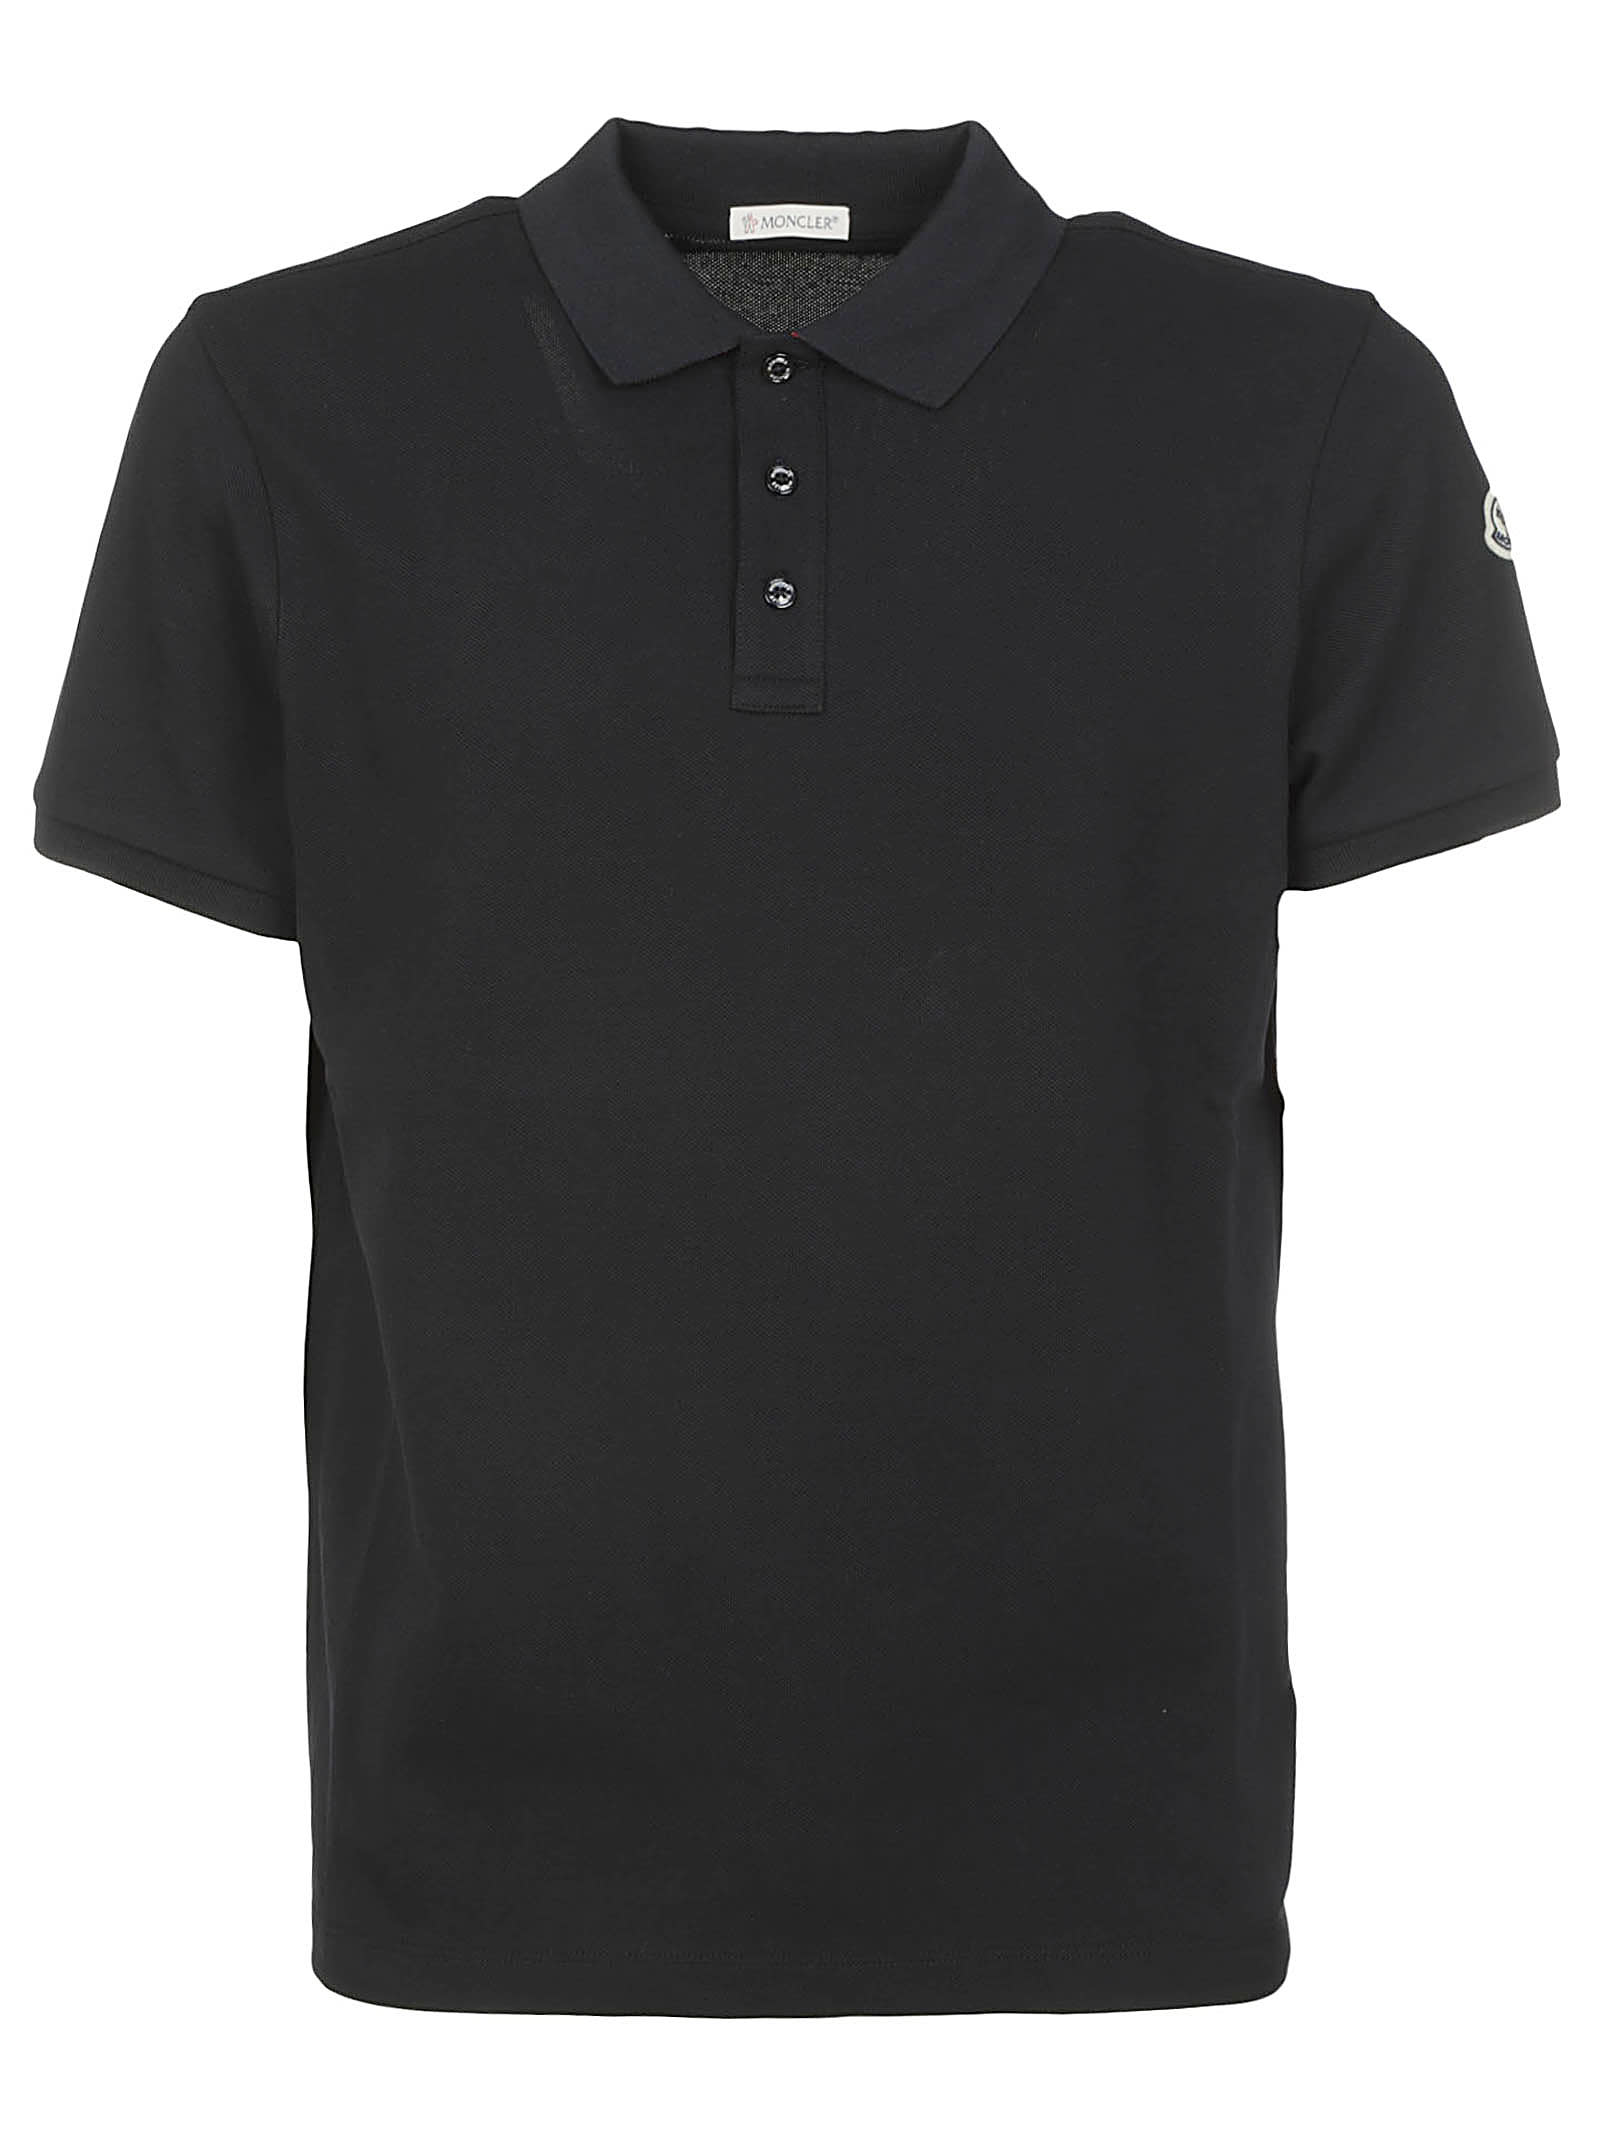 MONCLER LOGO PATCHED POLO SHIRT,11785091